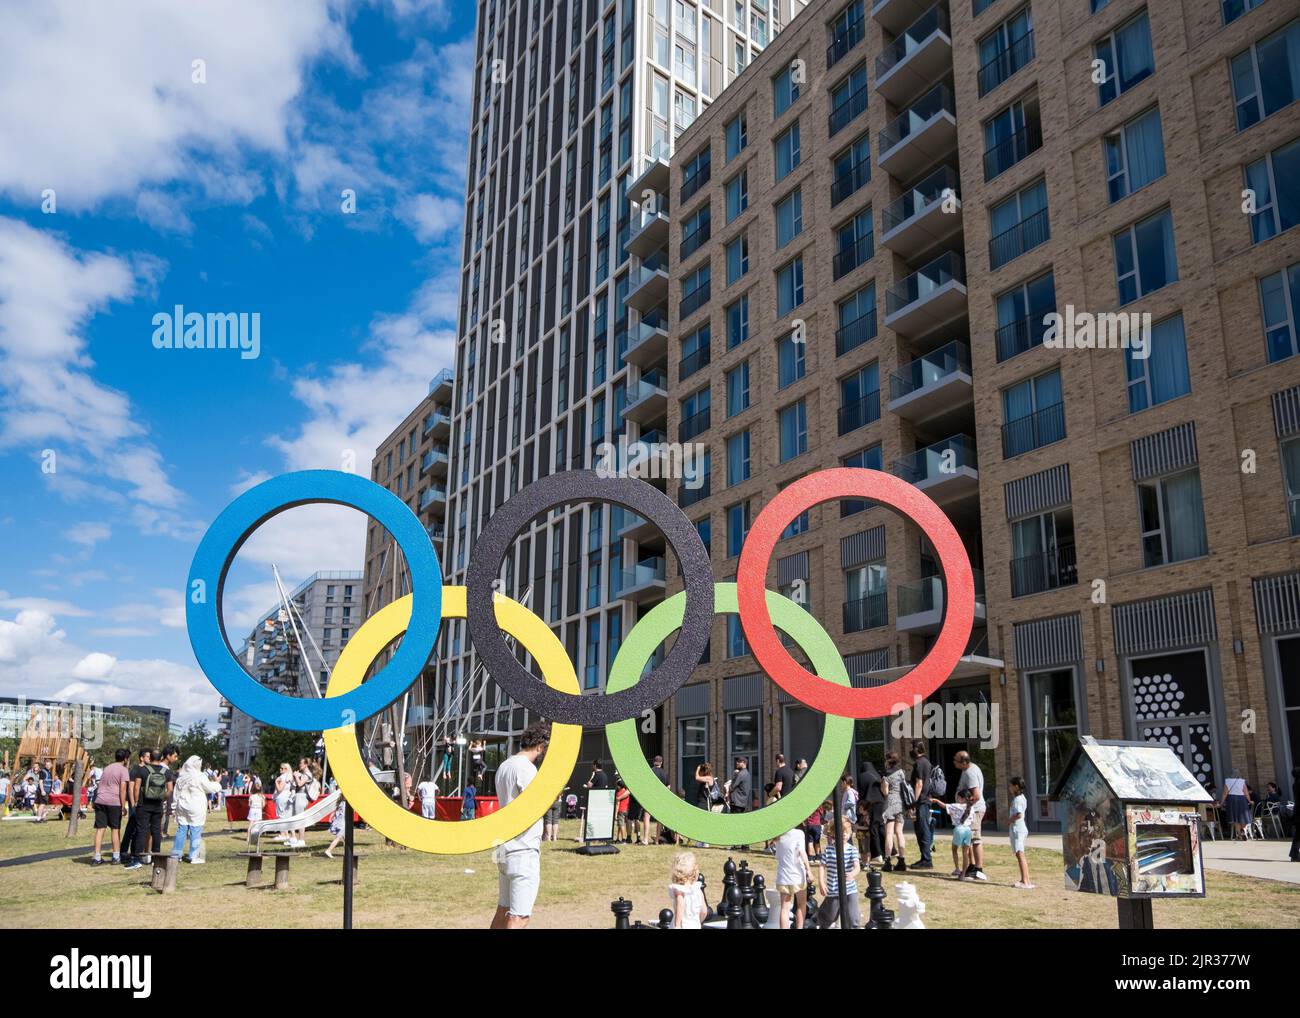 Olympic Rings, E20 Summer Fete, celebrating the 10 year anniversary of London 2012 Olympics where East Village was home too 17,000 athletes. Stock Photo